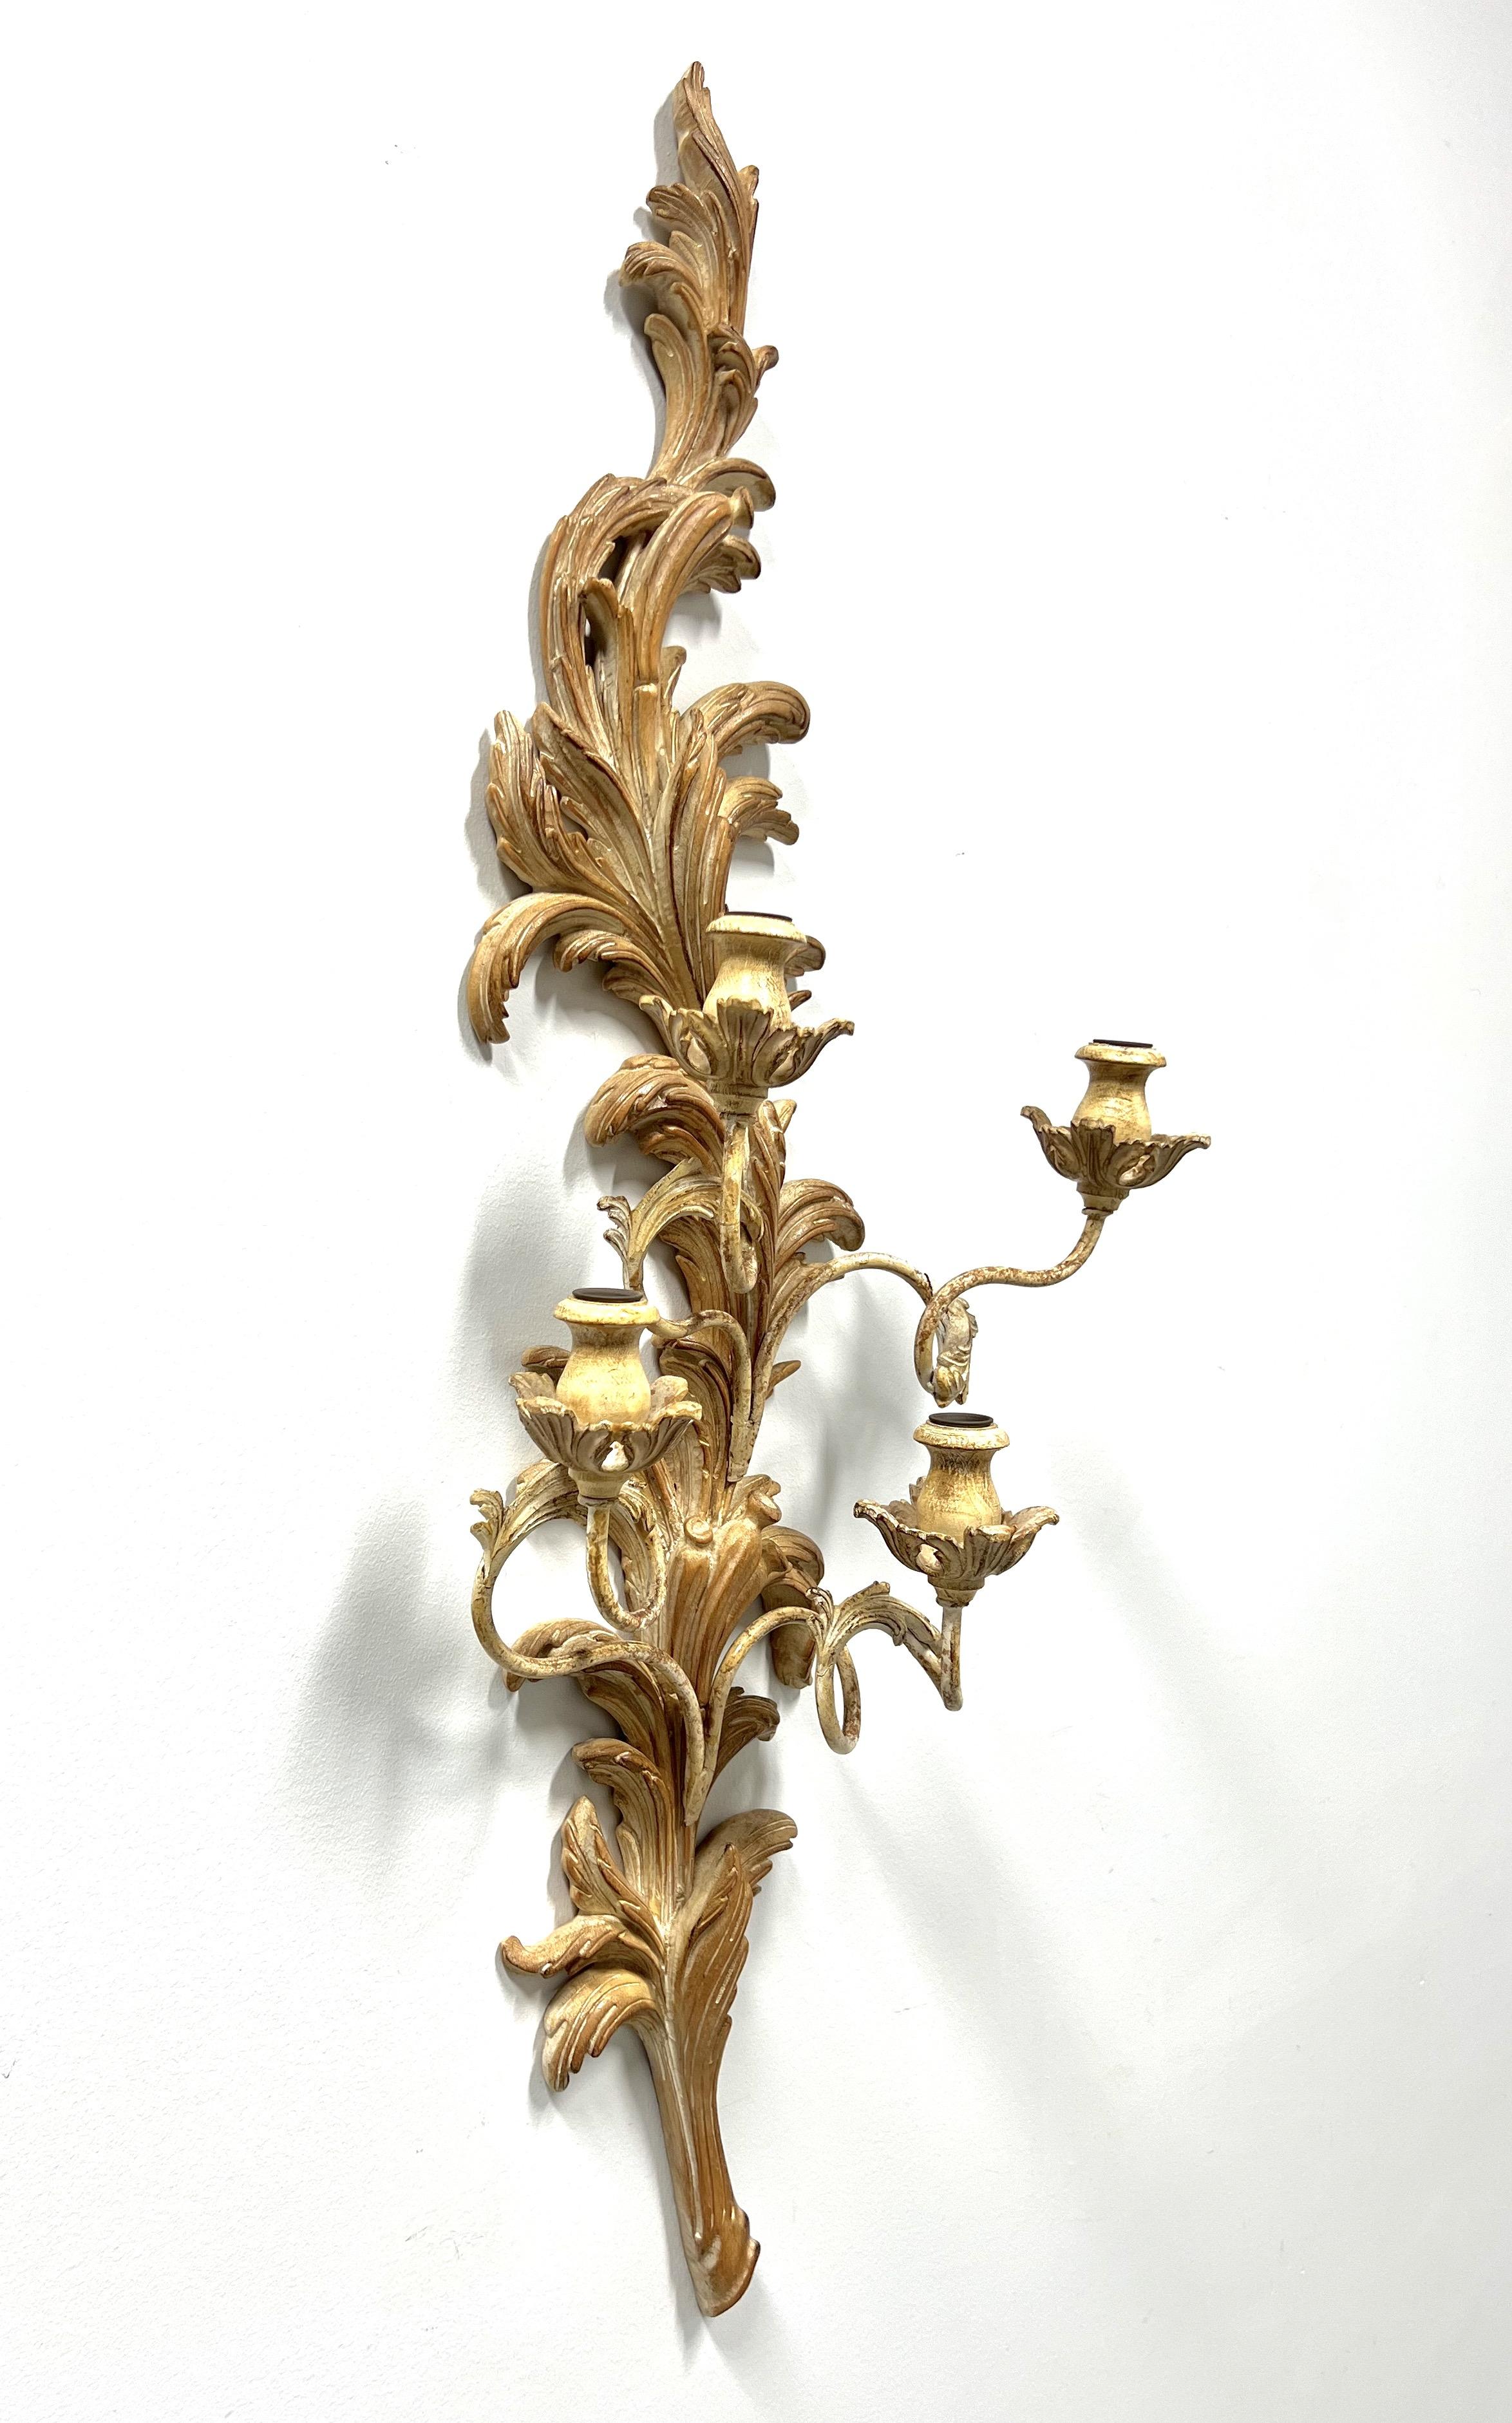 A Rococo style candle wall sconce by Marbro Lamp Company, of Los Angeles, California, USA. Solid wood with a whitewashed finish, decoratively carved in a foliate form, with four swirled arms and candleholders. Clip hanger to back for wall hanging.